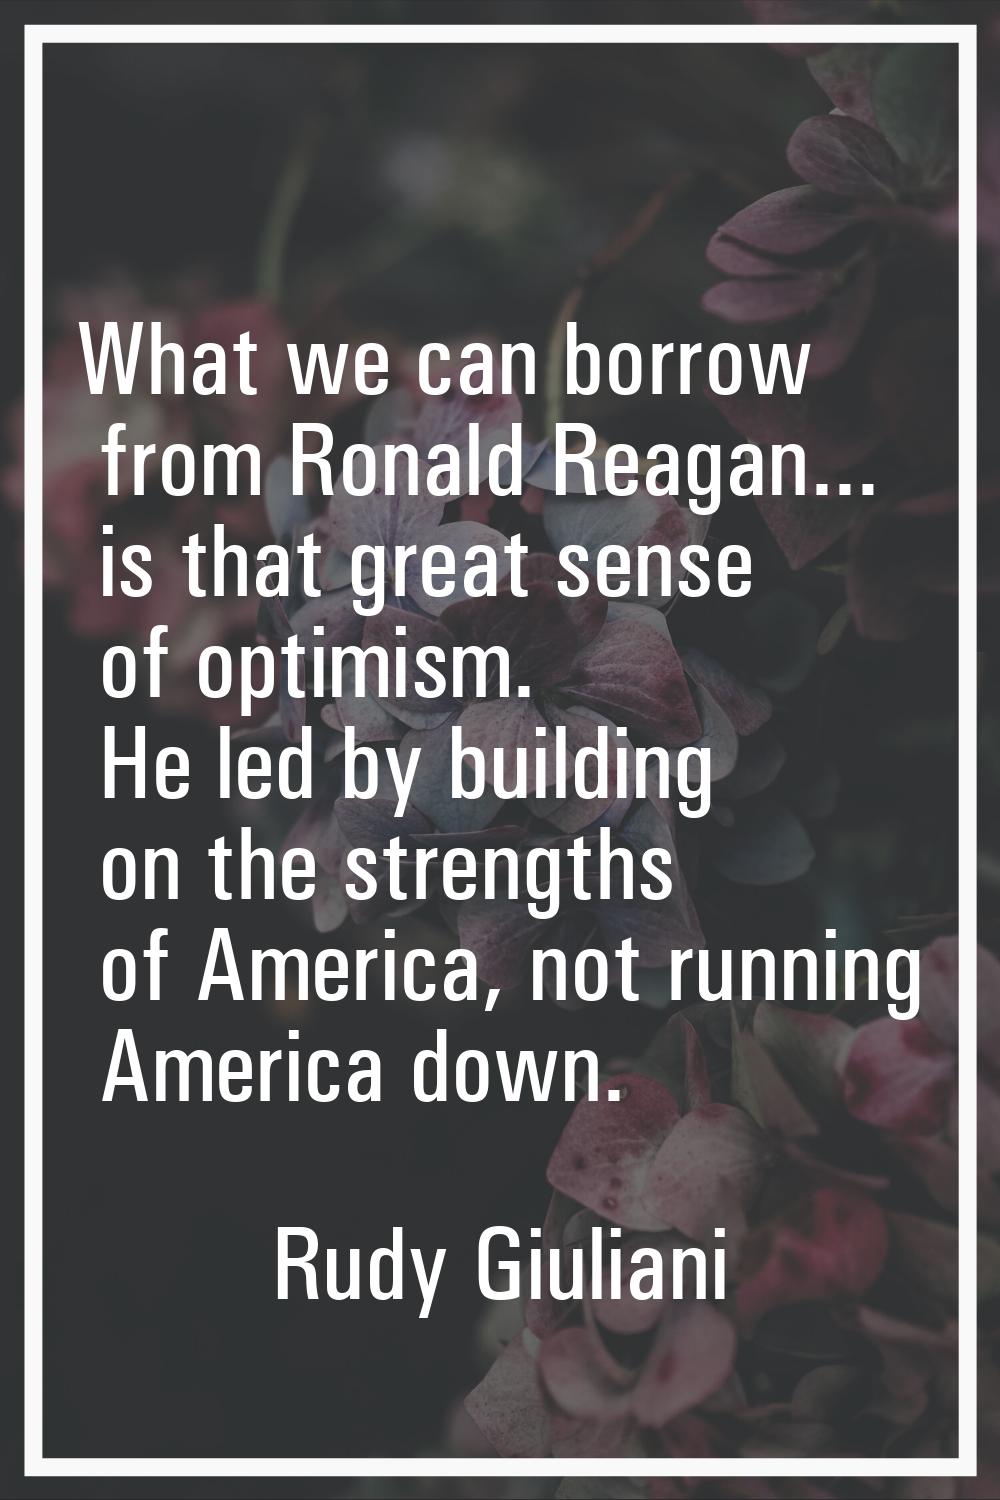 What we can borrow from Ronald Reagan... is that great sense of optimism. He led by building on the